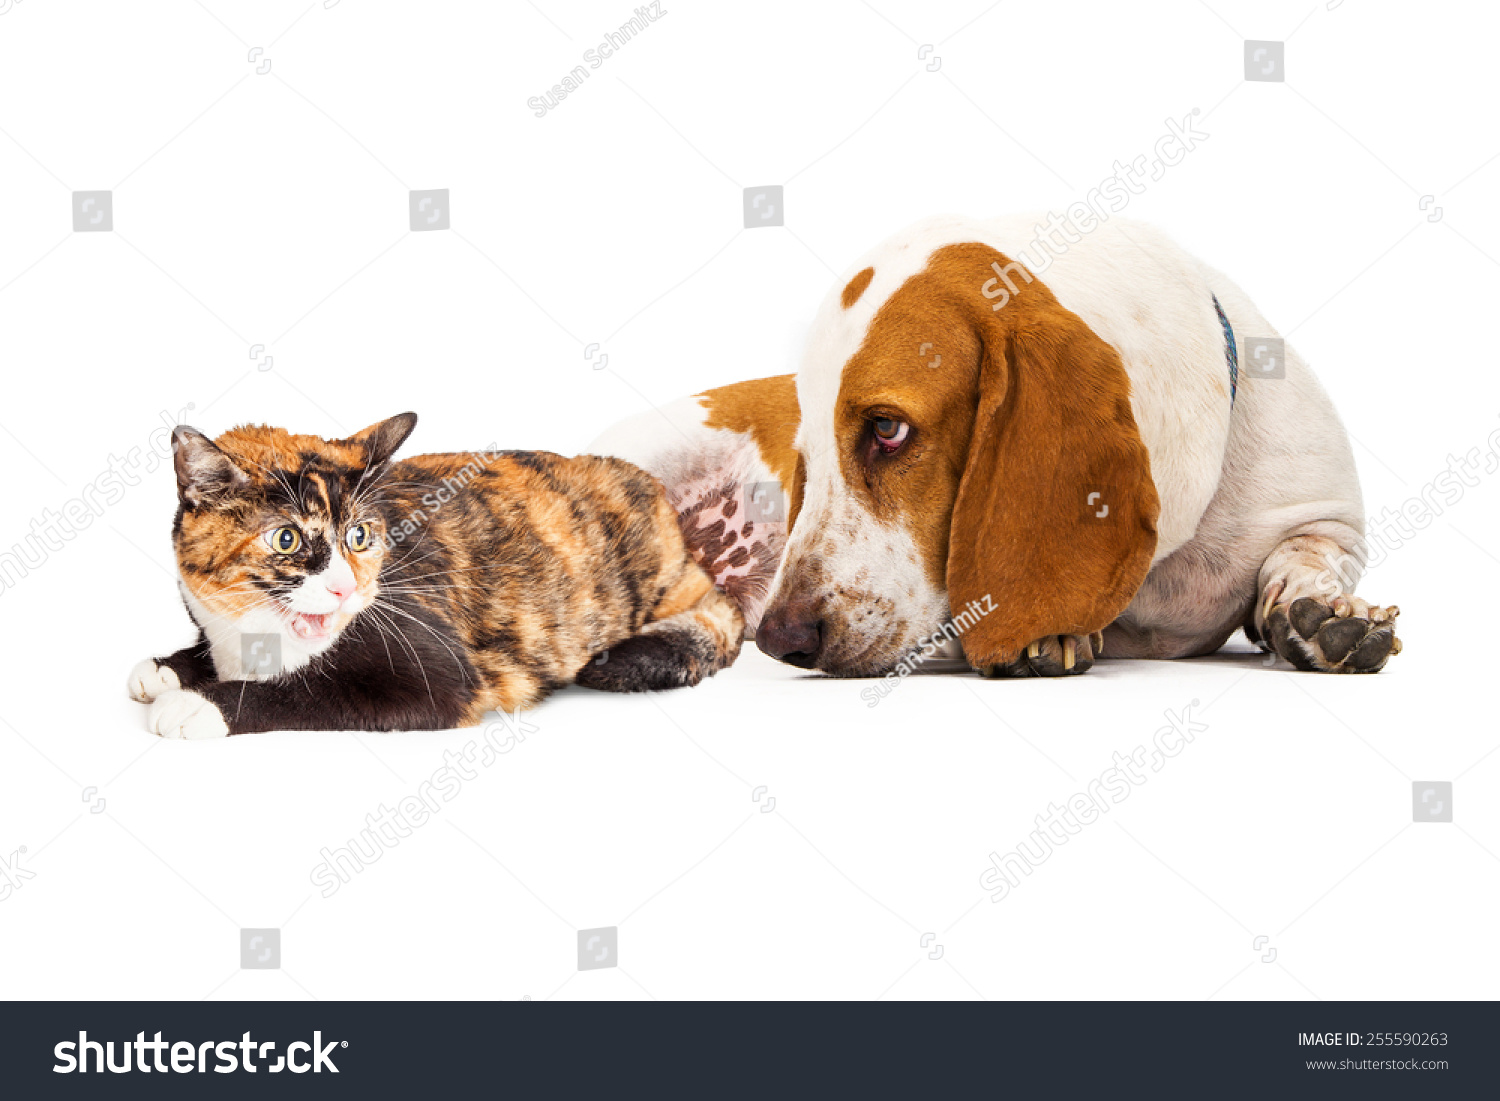 A curious Basset Hound Dog laying next to an angry Calico cat #255590263